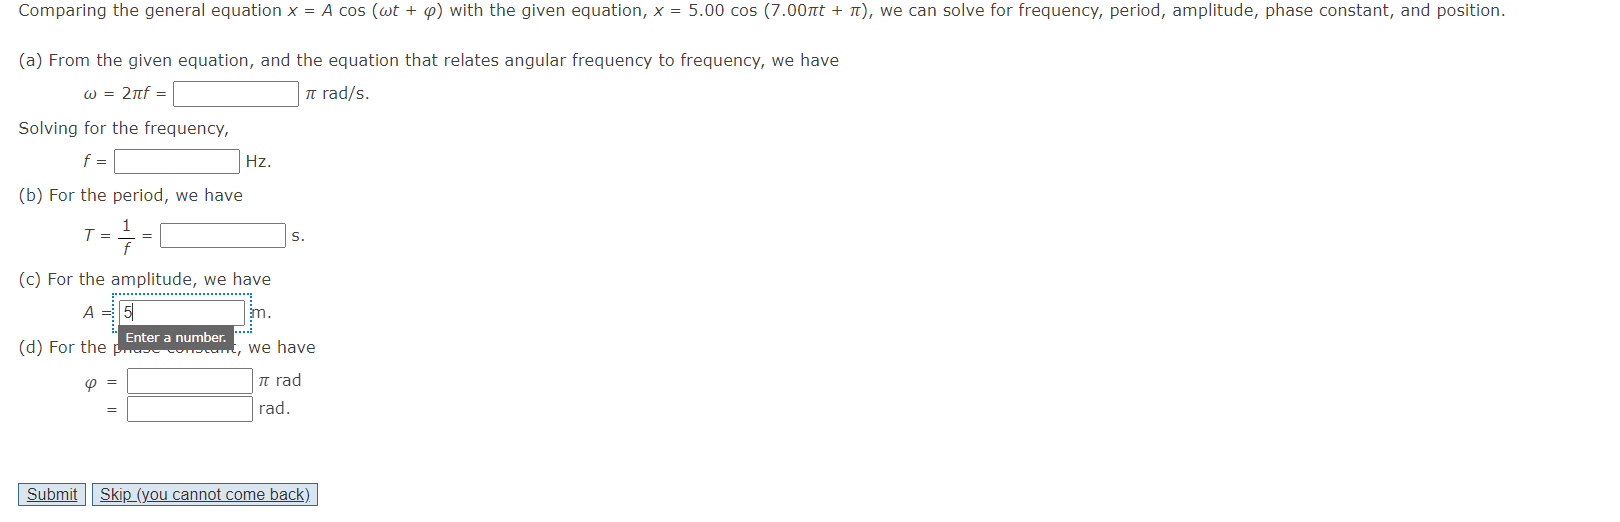 Comparing the general equation x = A cos (wt + p) with the given equation, x = 5.00 cos (7.00t + ), we can